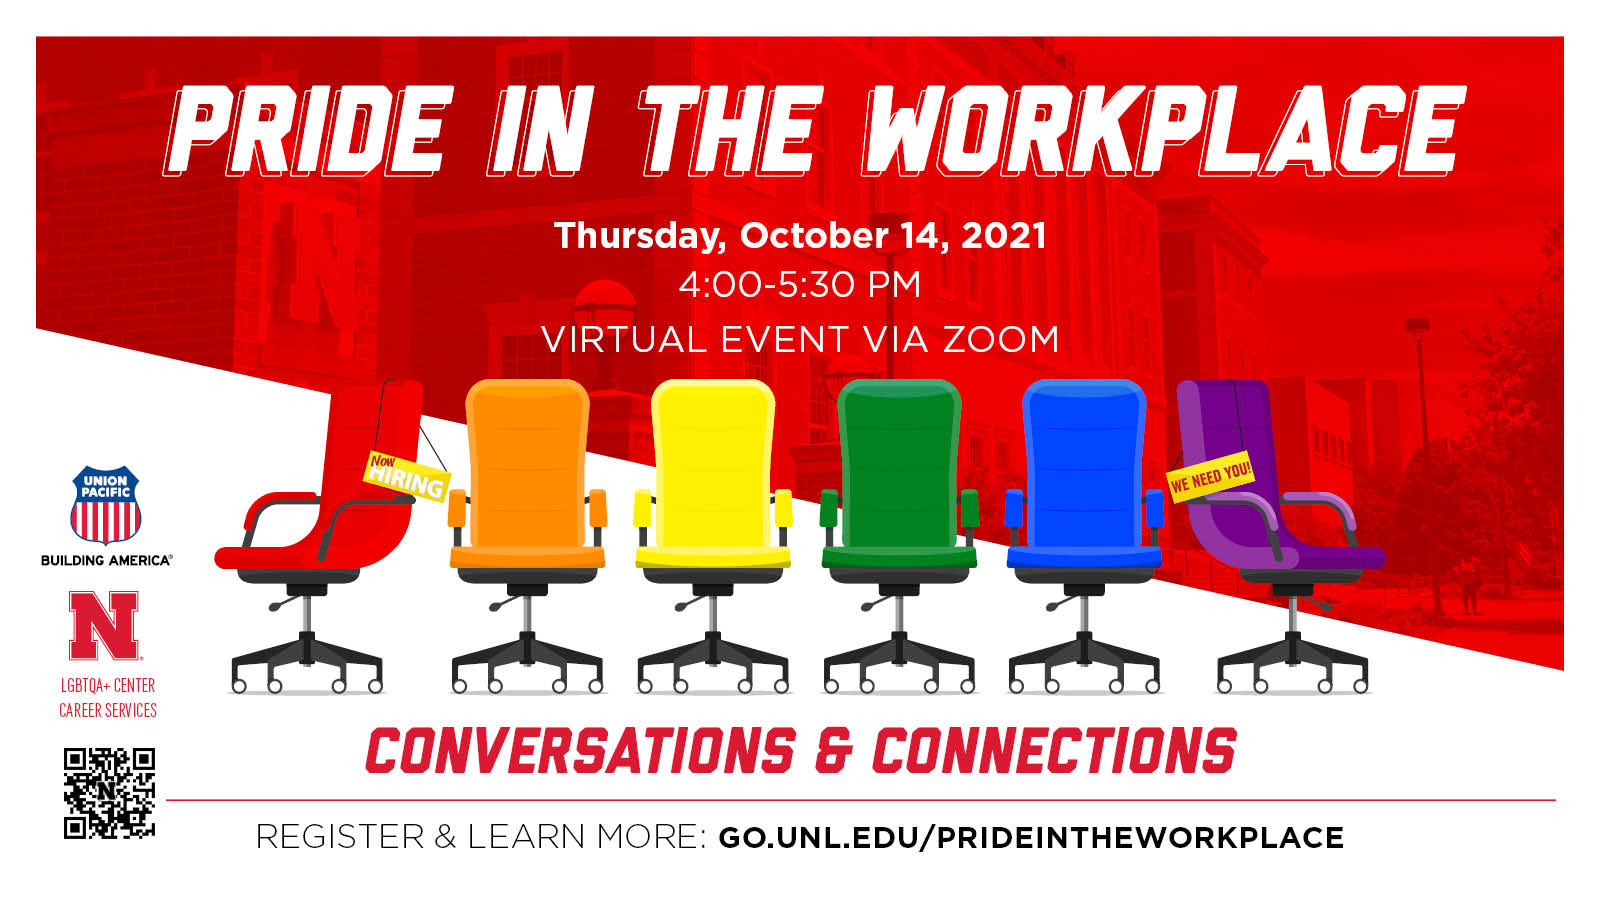 UNL University Career Services and the UNL LGBTQA+ Resource Center invite you to Pride in the Workplace, a virtual event where LGBTQA+ students, allies, and employers can create connections and talk about workplace inclusion.